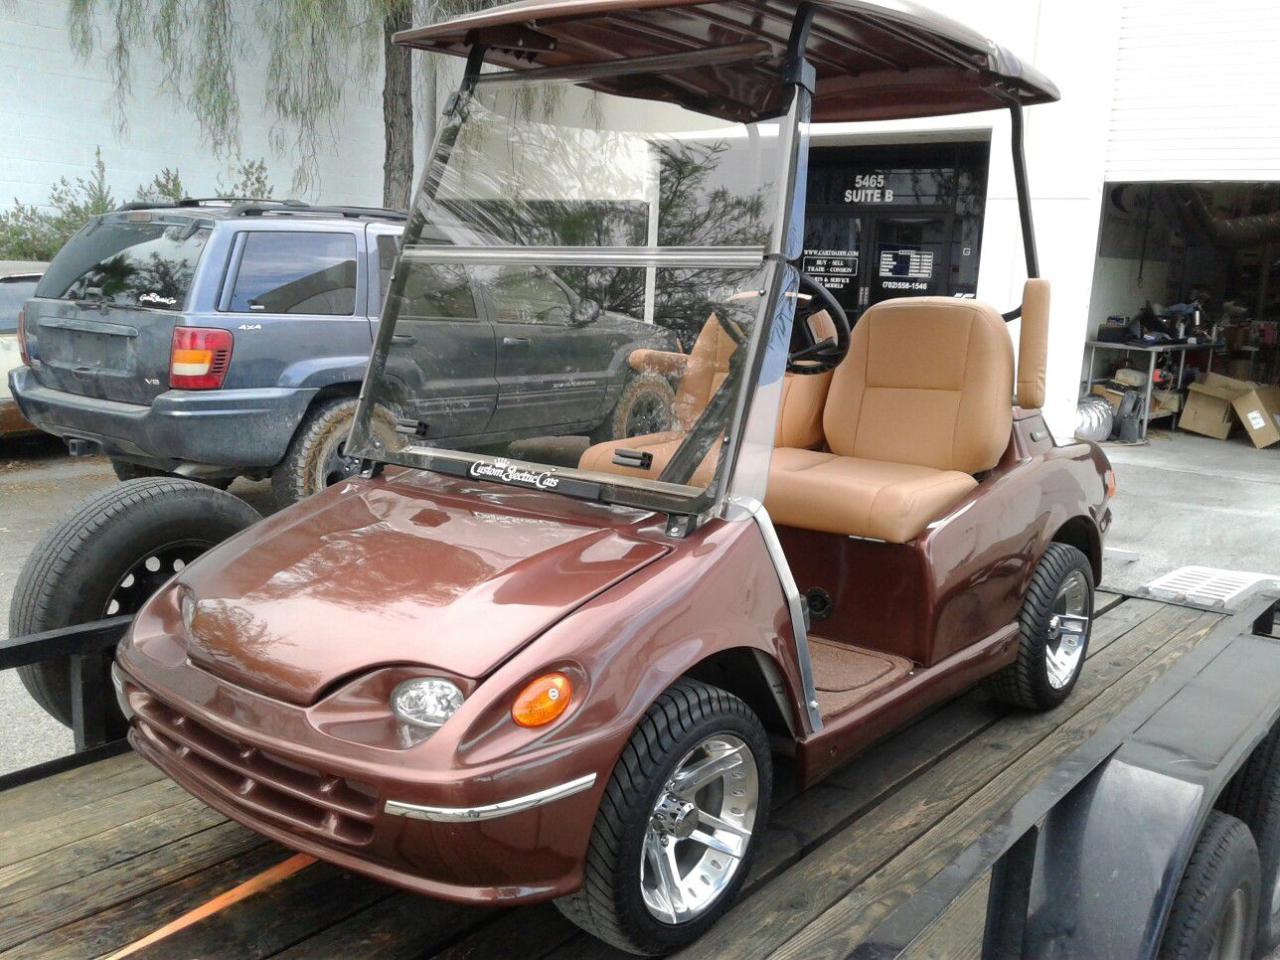 Used Golf Carts For Sale By Owner In Whitman, Washington: Find Your Perfect Ride Today!